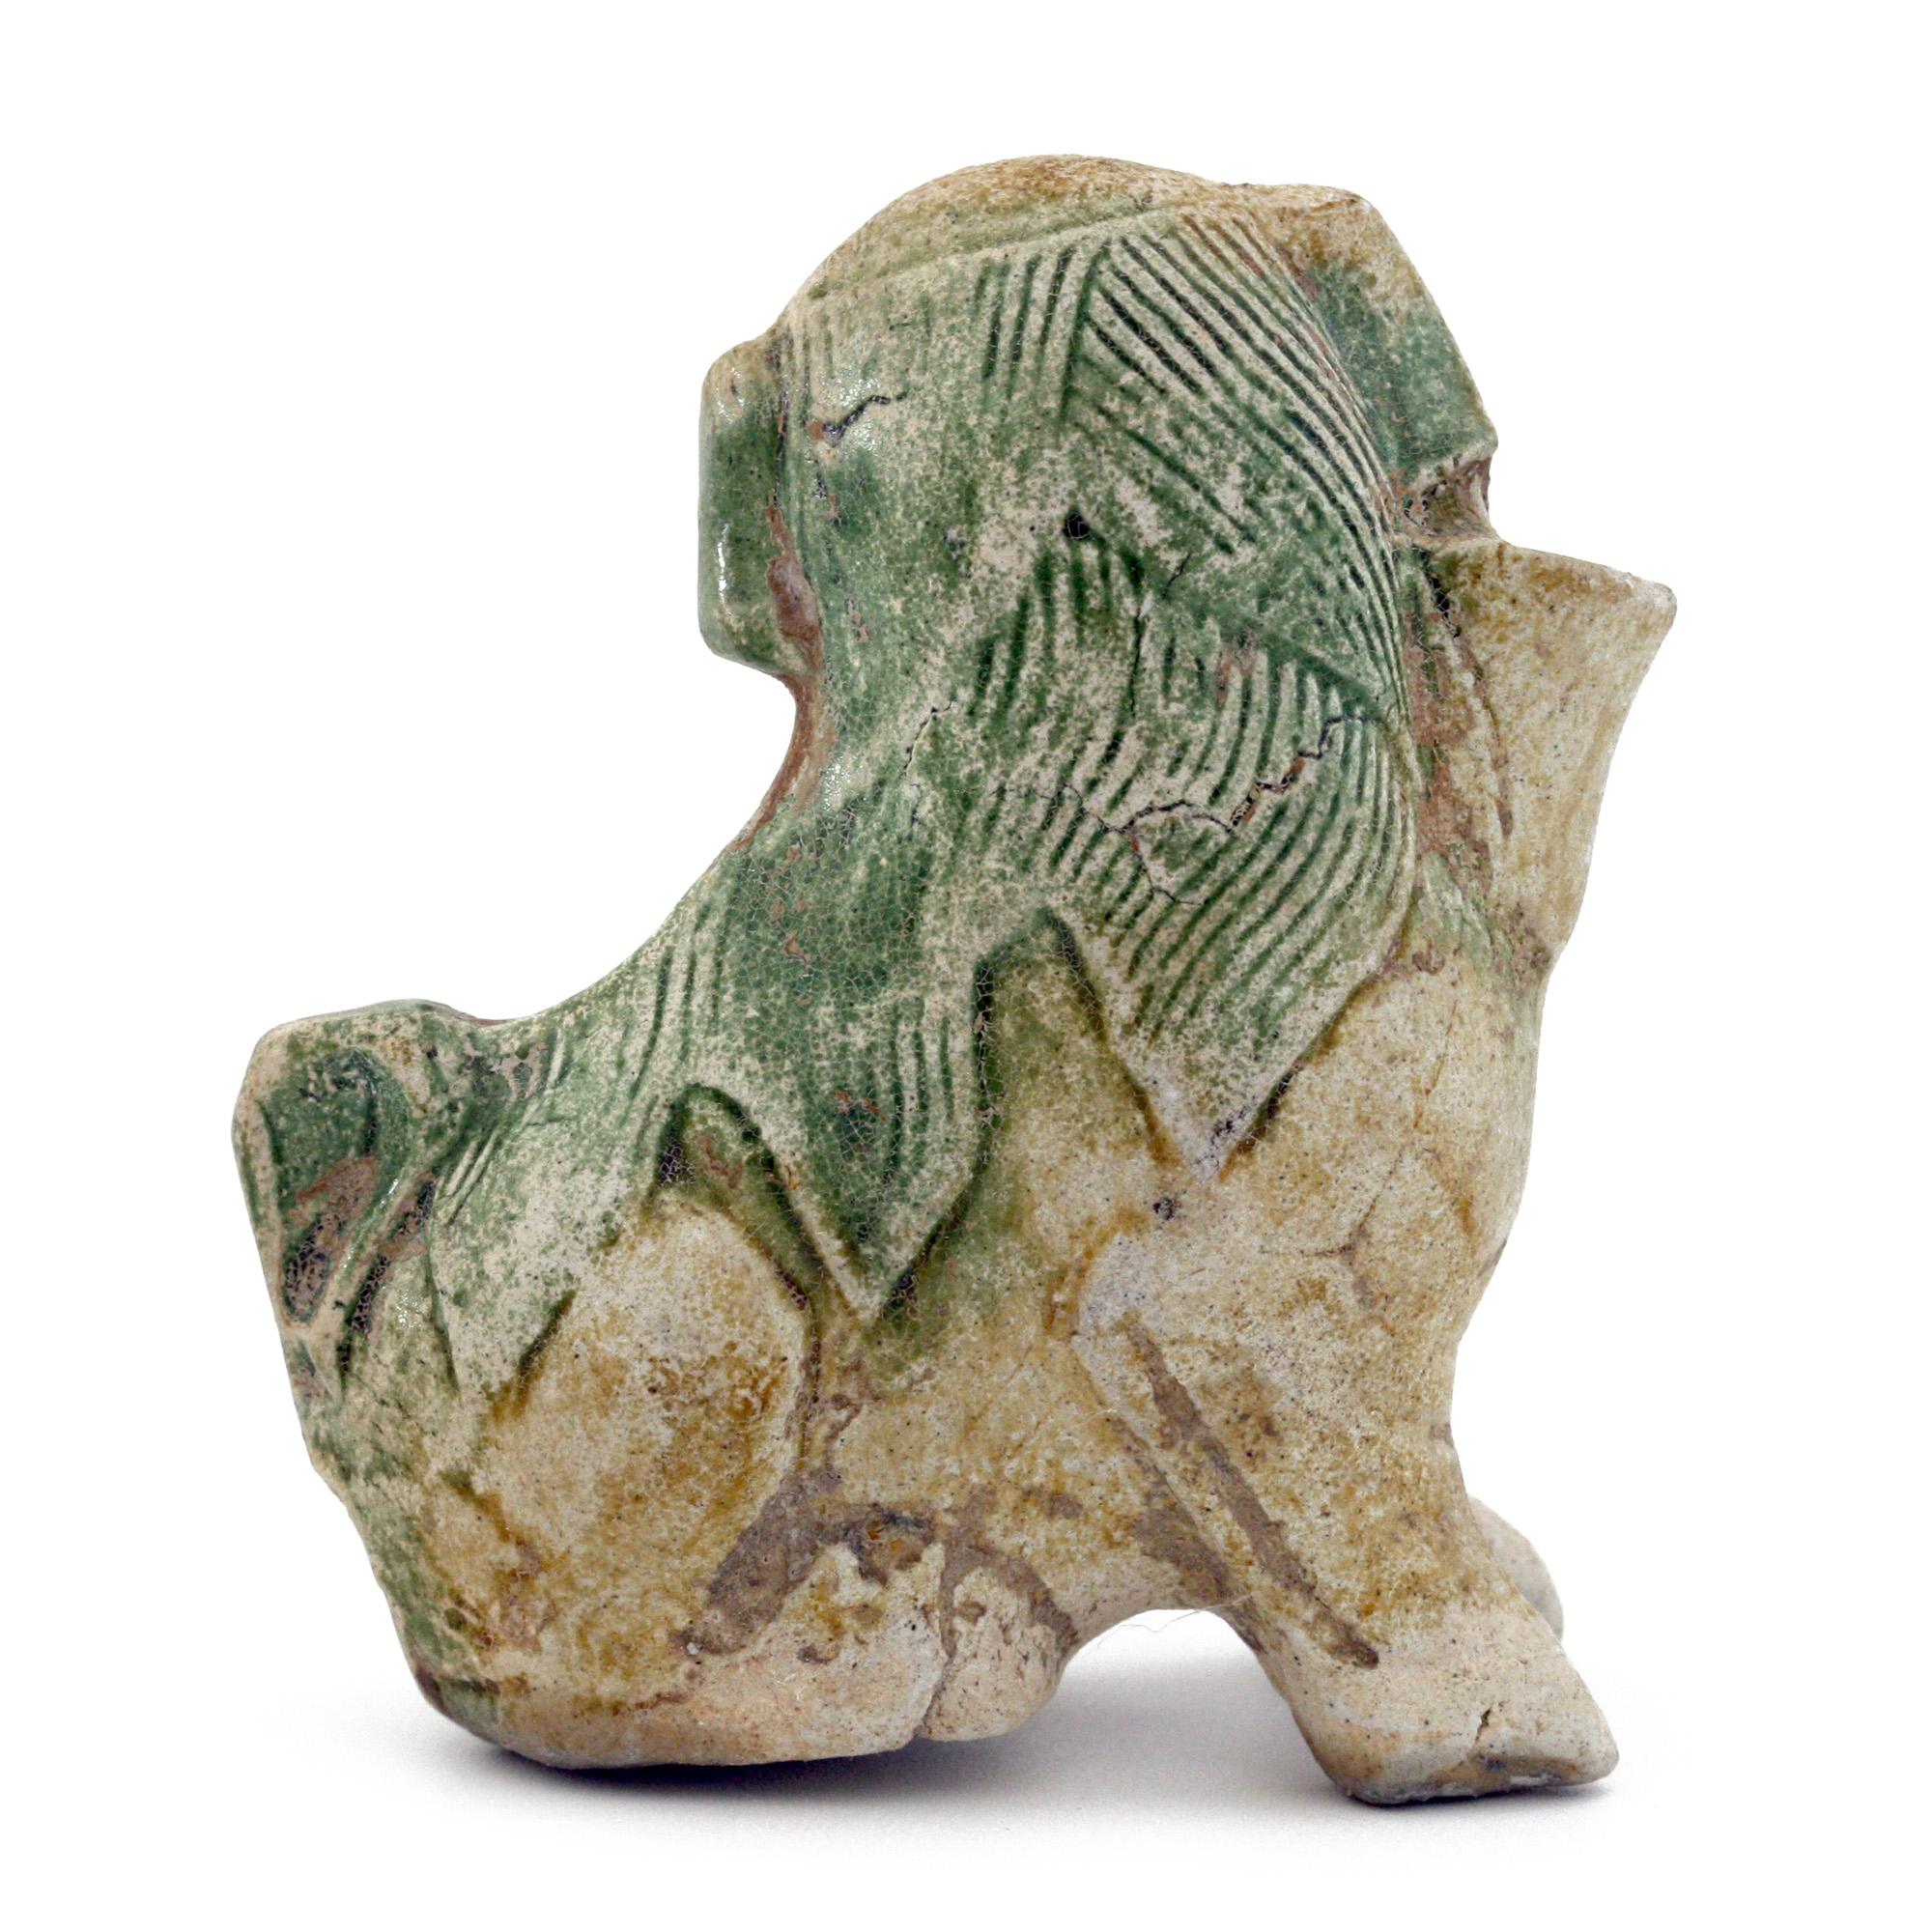 A delightful antique Chinese Ca Mau shipwreck pottery Fo Dog joss stick holder, partially decorated in green glazes and dating from around 1725. The dog has finely detailed features and glances sideways and has an original Sotheby's CA MAU - BINH